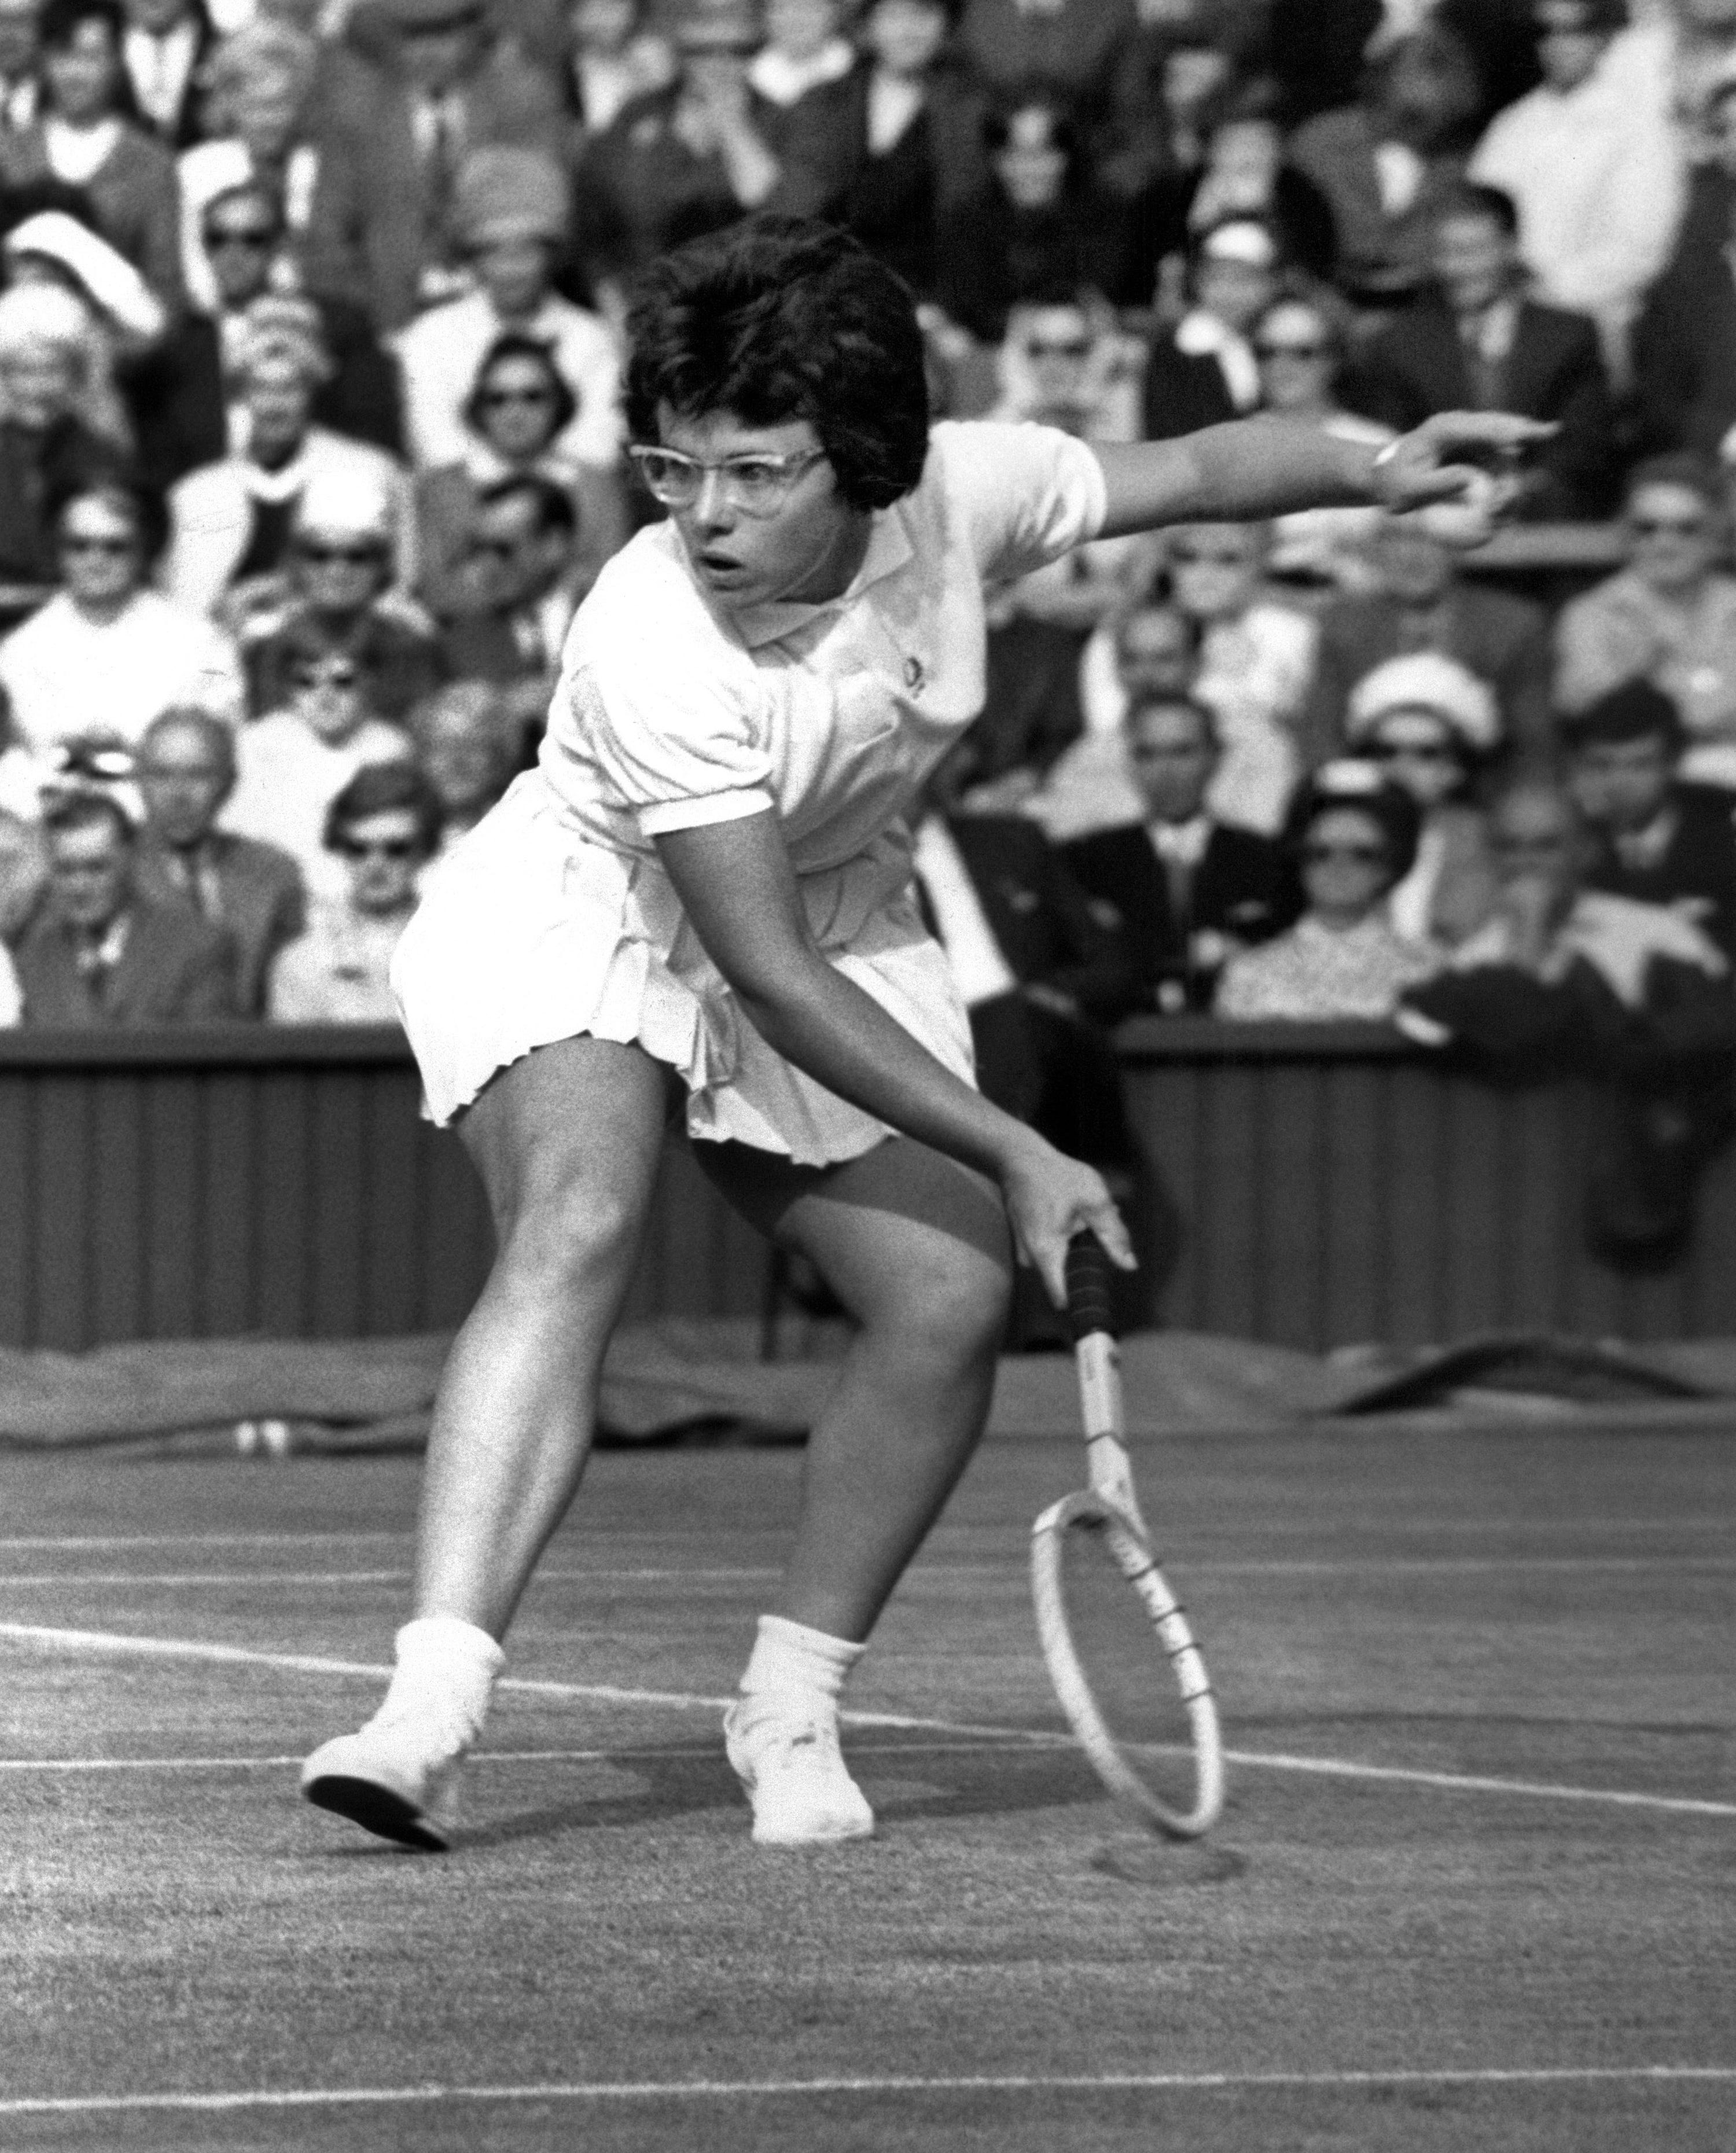 Billie Jean King on equal pay for women in tennis: We did it as a team